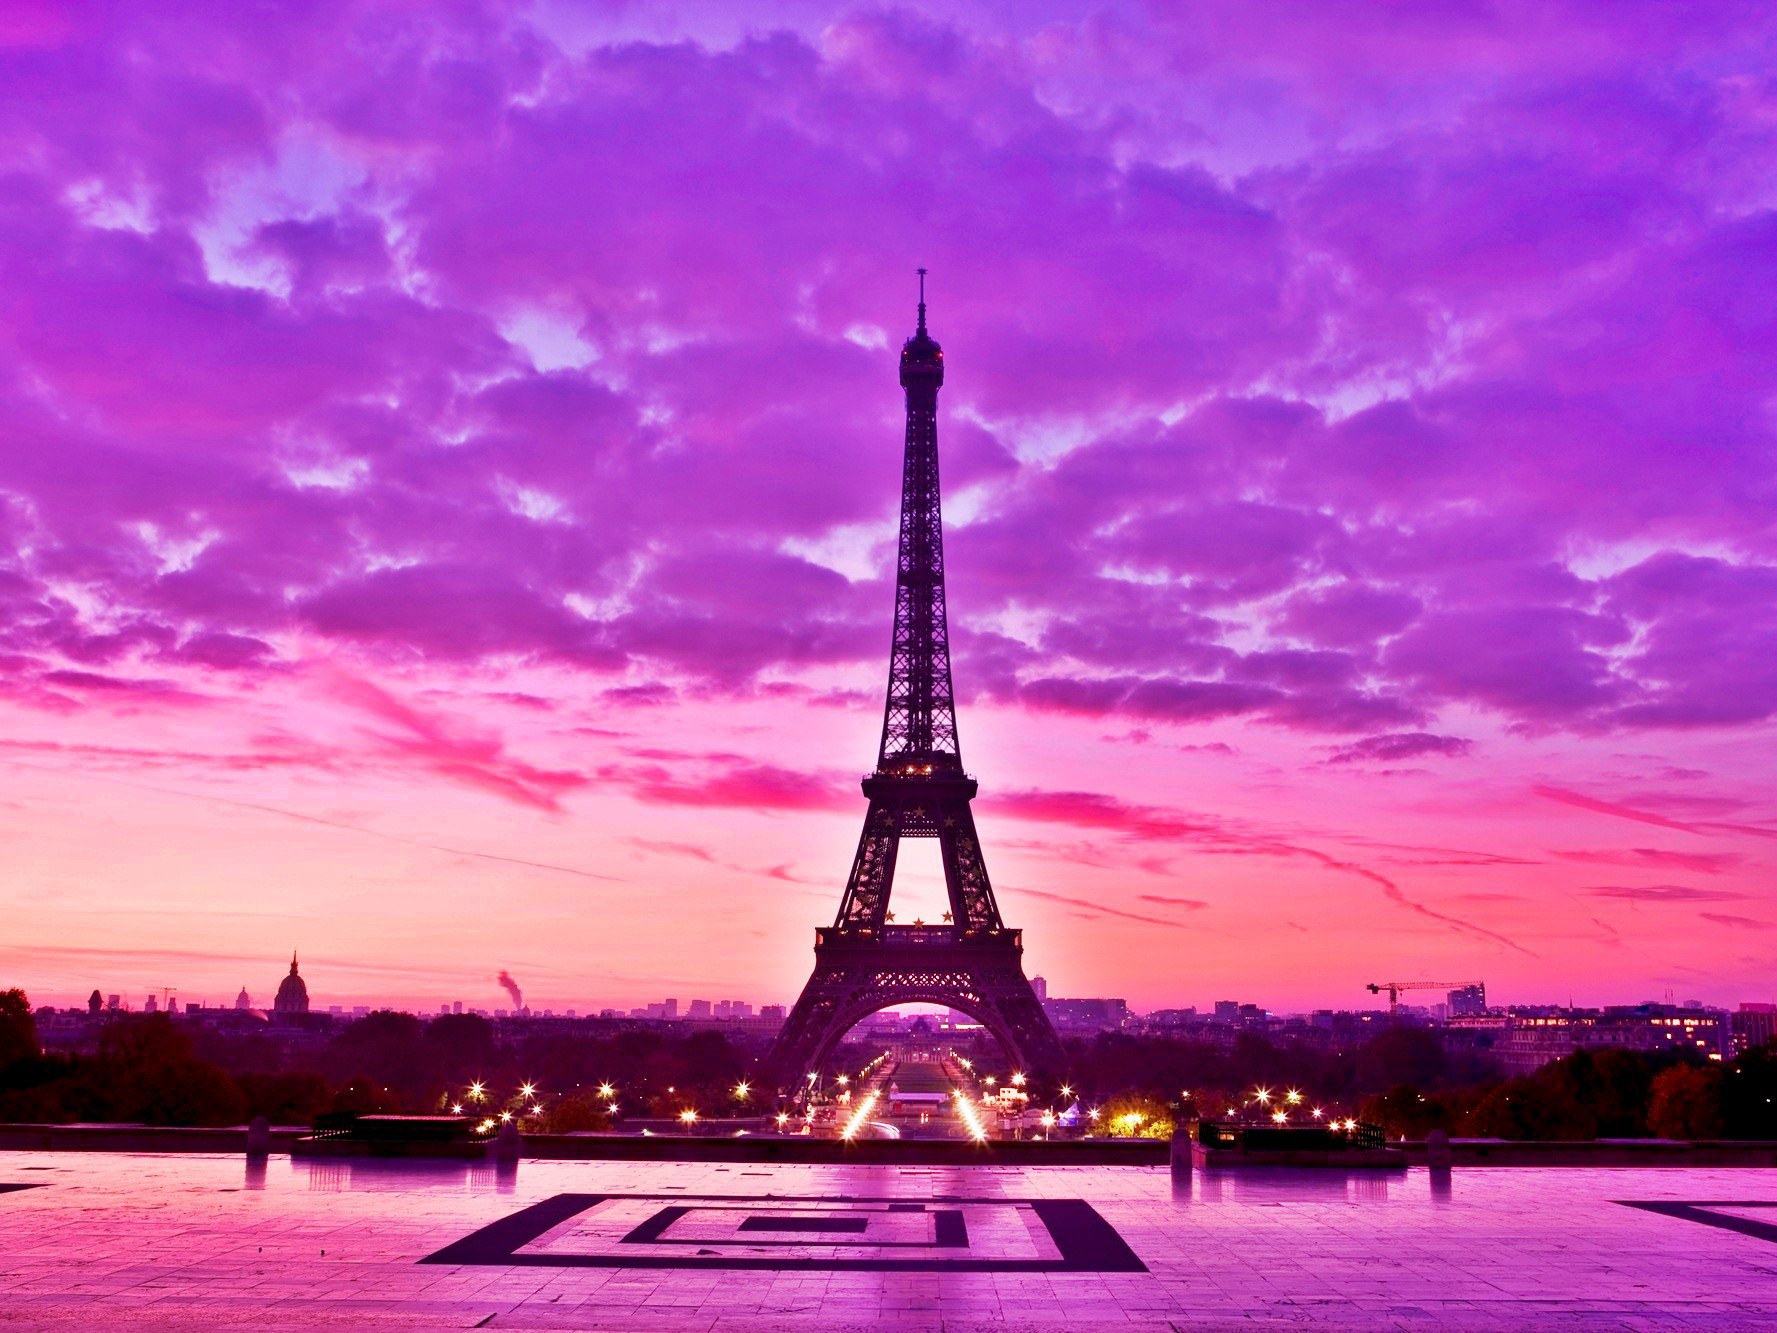 Bright picture of the Eiffel Tower wallpapers and images